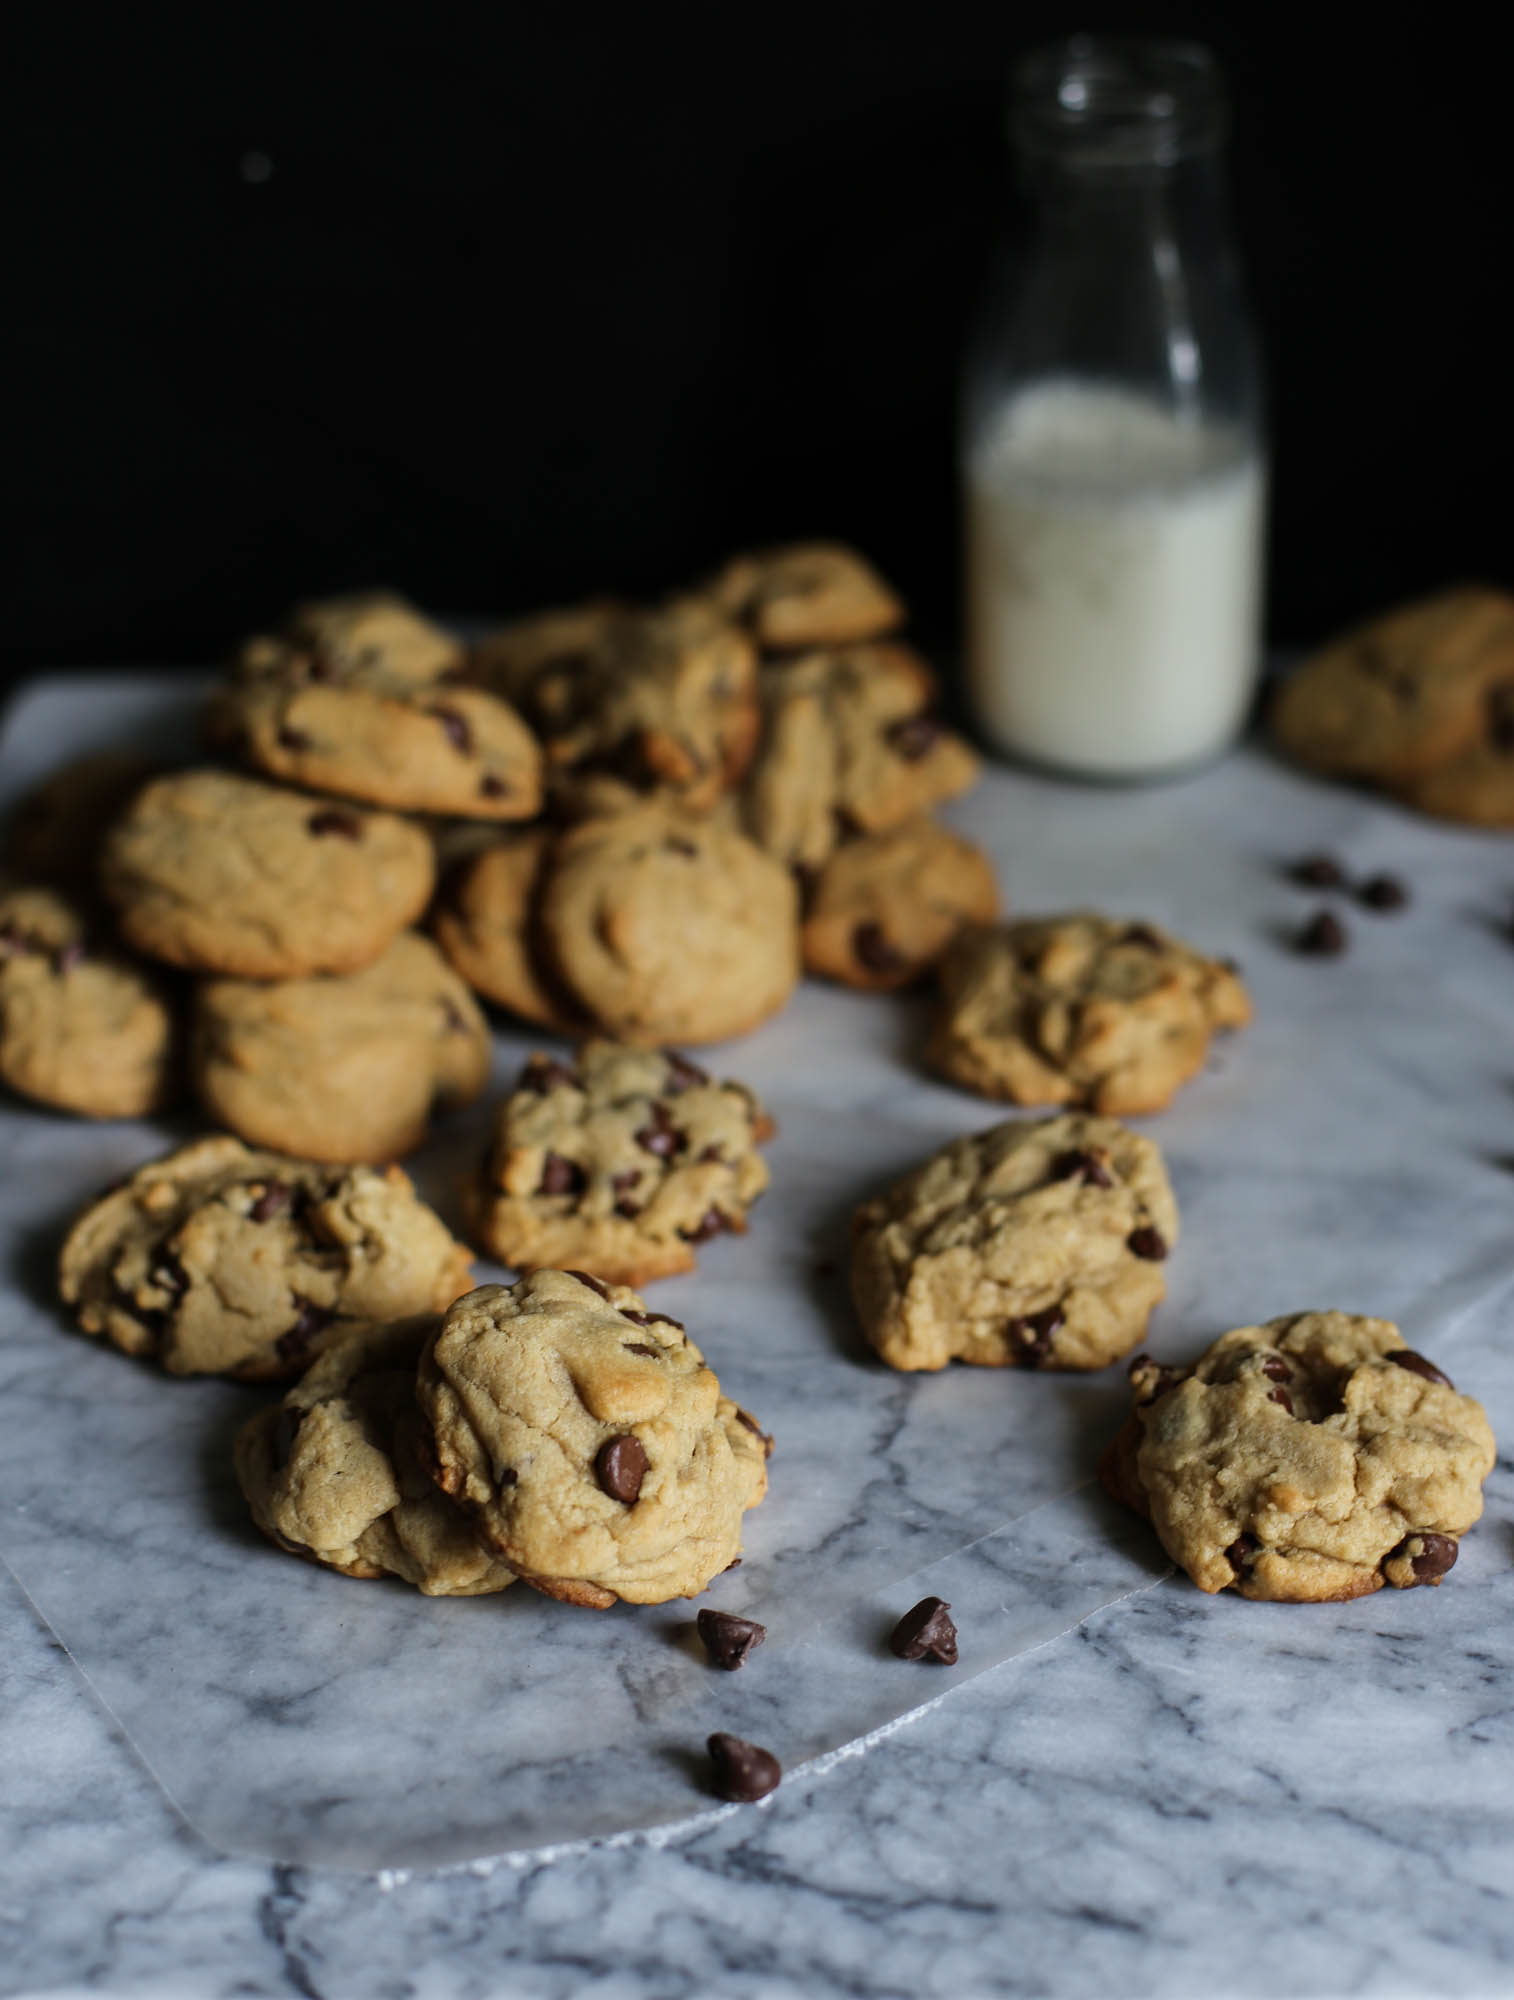 The Best Chocolate Chip Cookies by The District Table